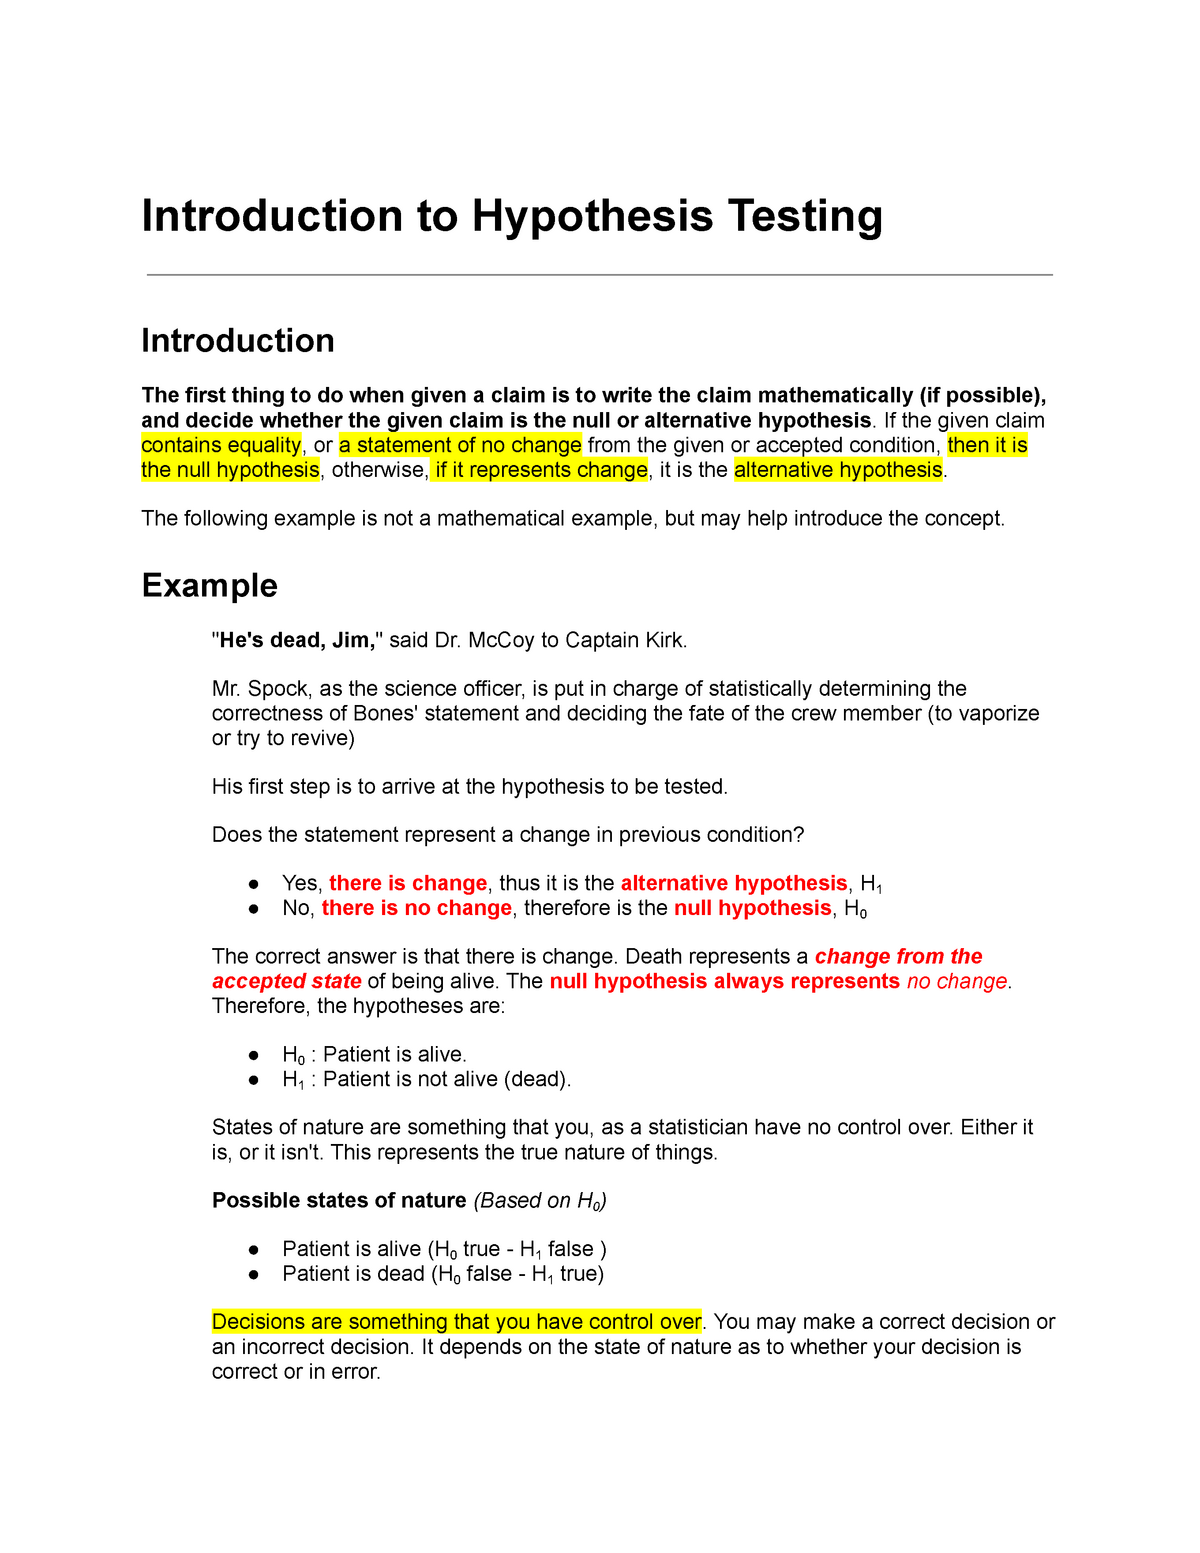 introduction to hypothesis testing assignment